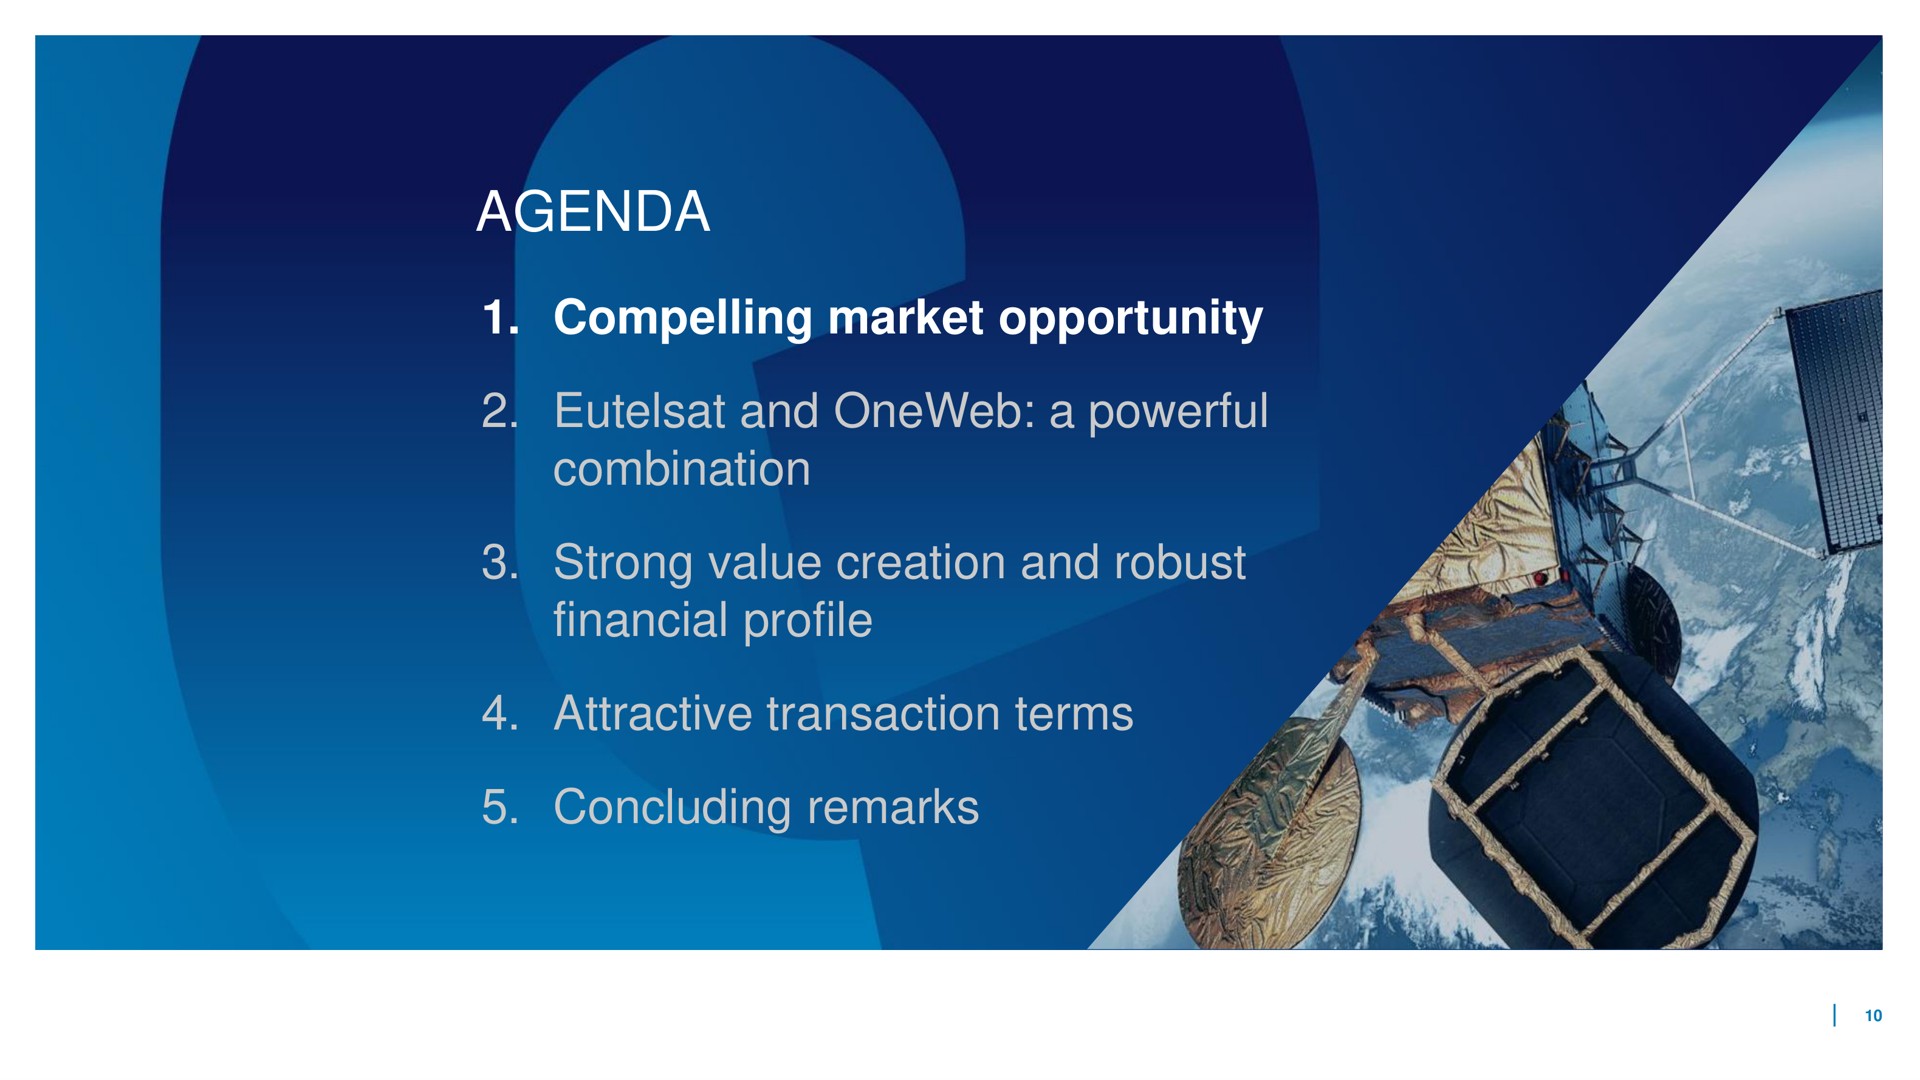 agenda compelling market opportunity and a powerful combination strong value creation and robust financial profile attractive transaction terms concluding remarks loin | Eutelsat